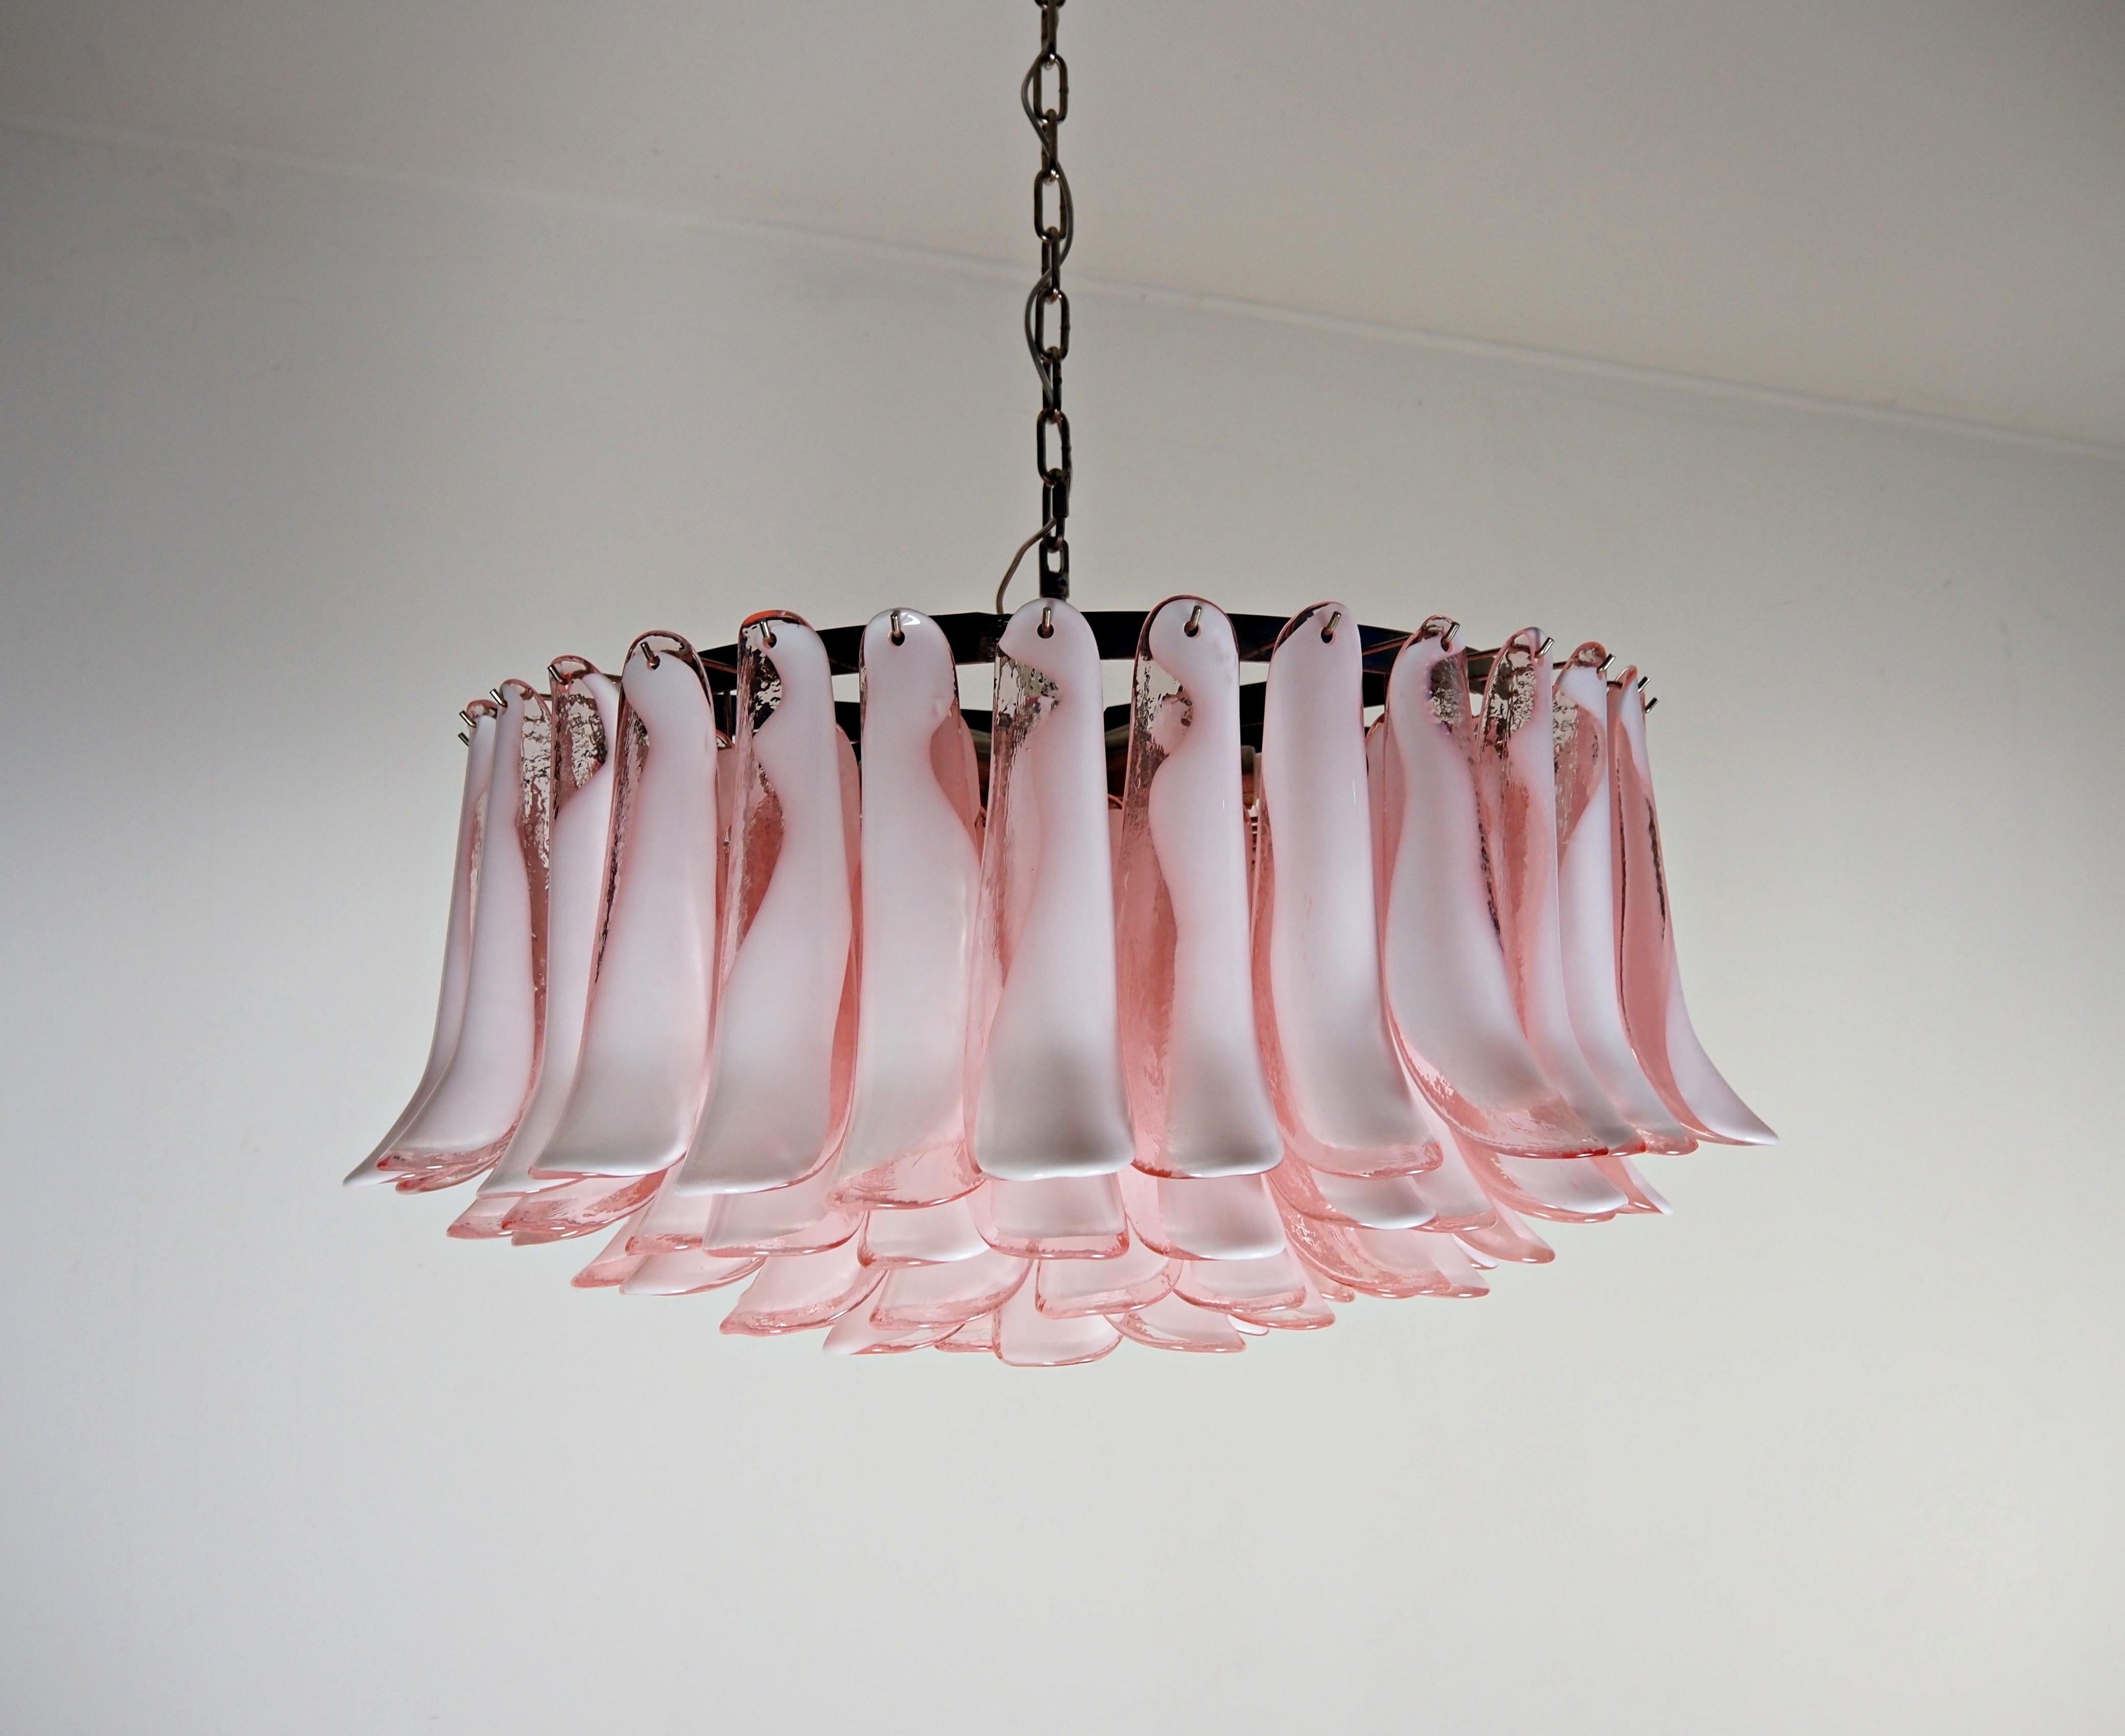 Pair Italian vintage chandeliers in Murano glass and nickel plated metal structure. The armor polished nickel supports 101 glass petals (pink and white “lattimo”) that give a very elegant look. Can be used as a chandelier with chain, or as a ceiling